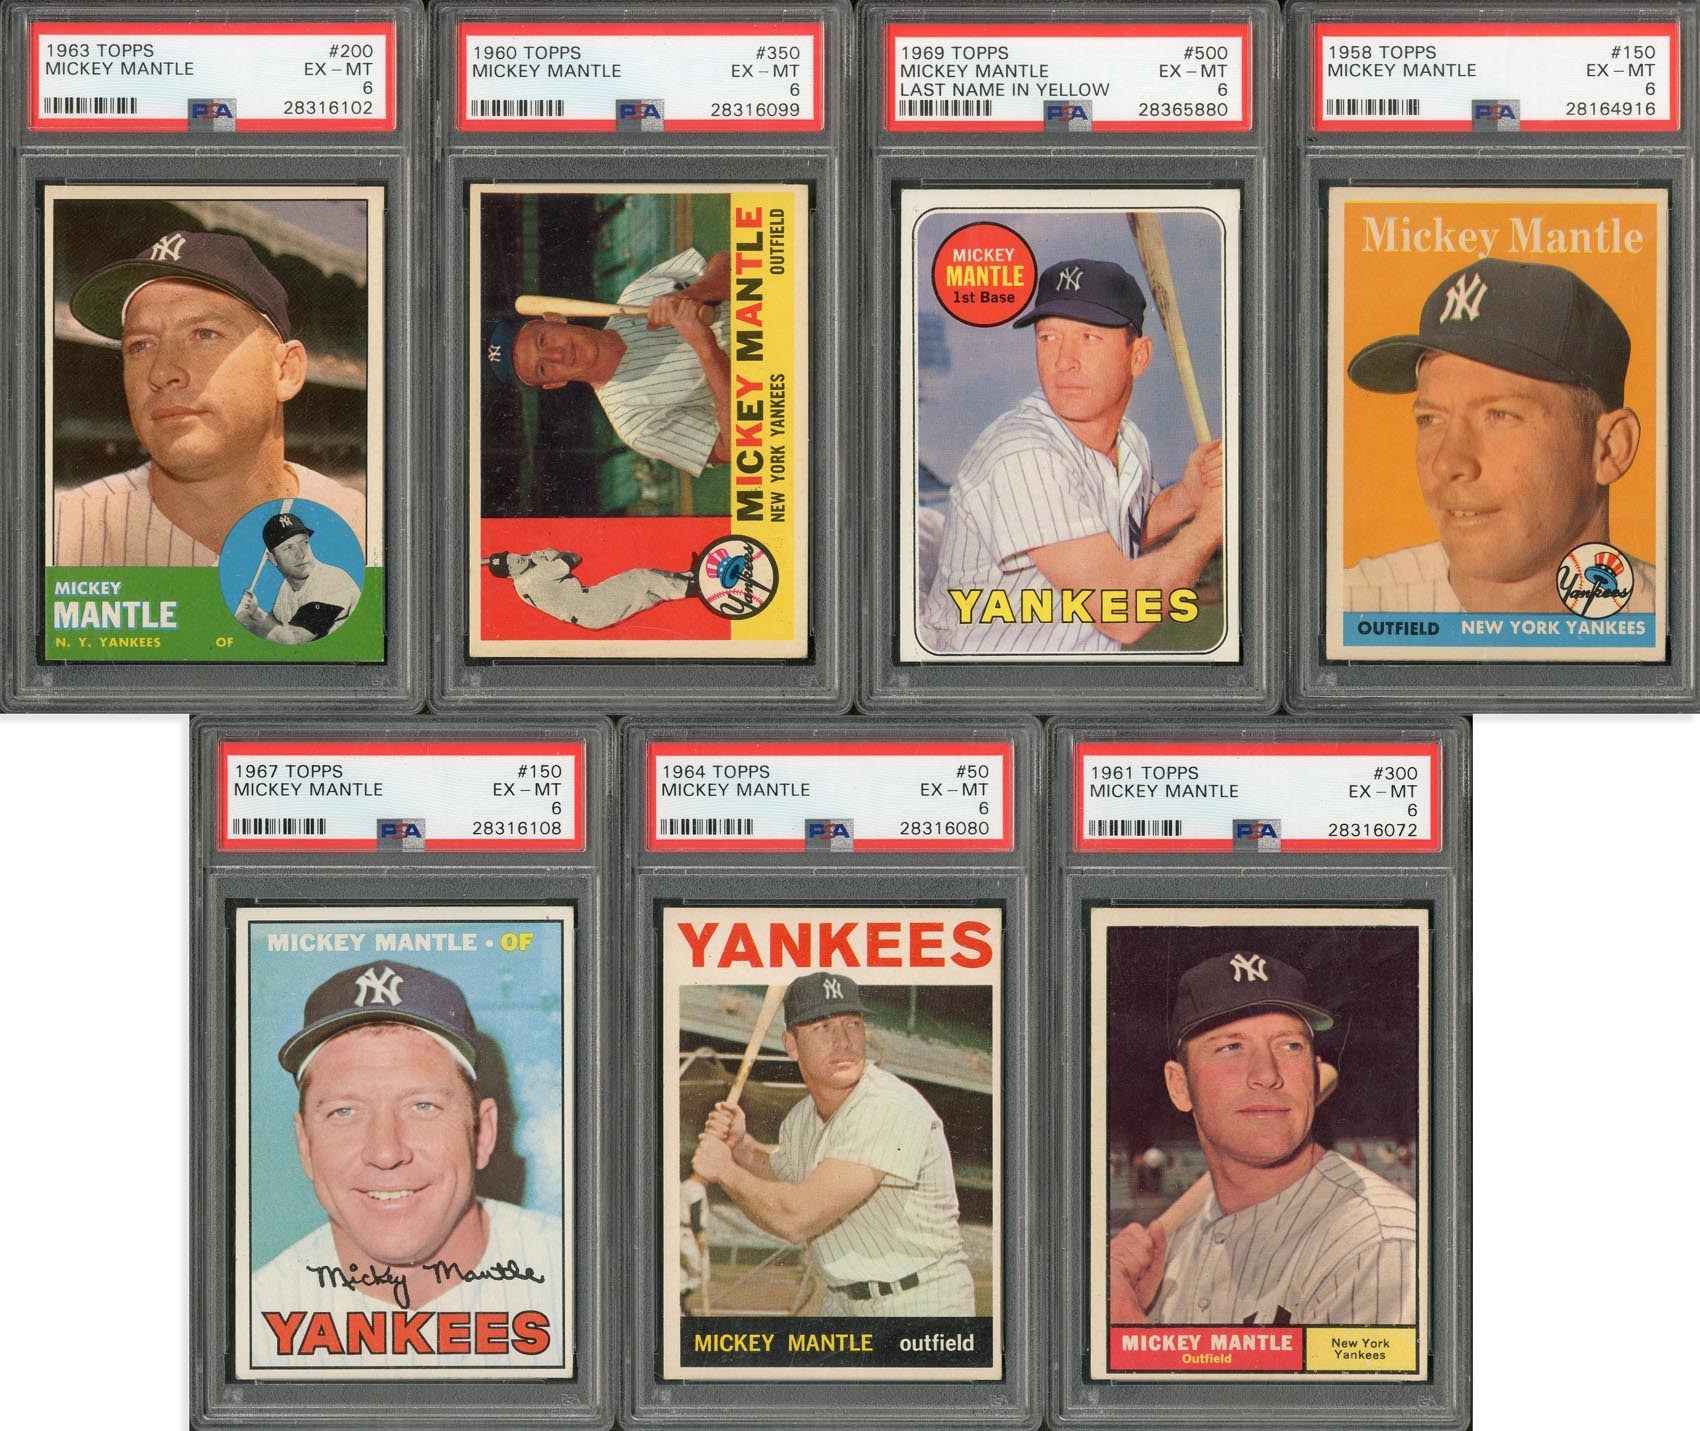 1958-69 Topps Mickey Mantle PSA Graded Collection (7)